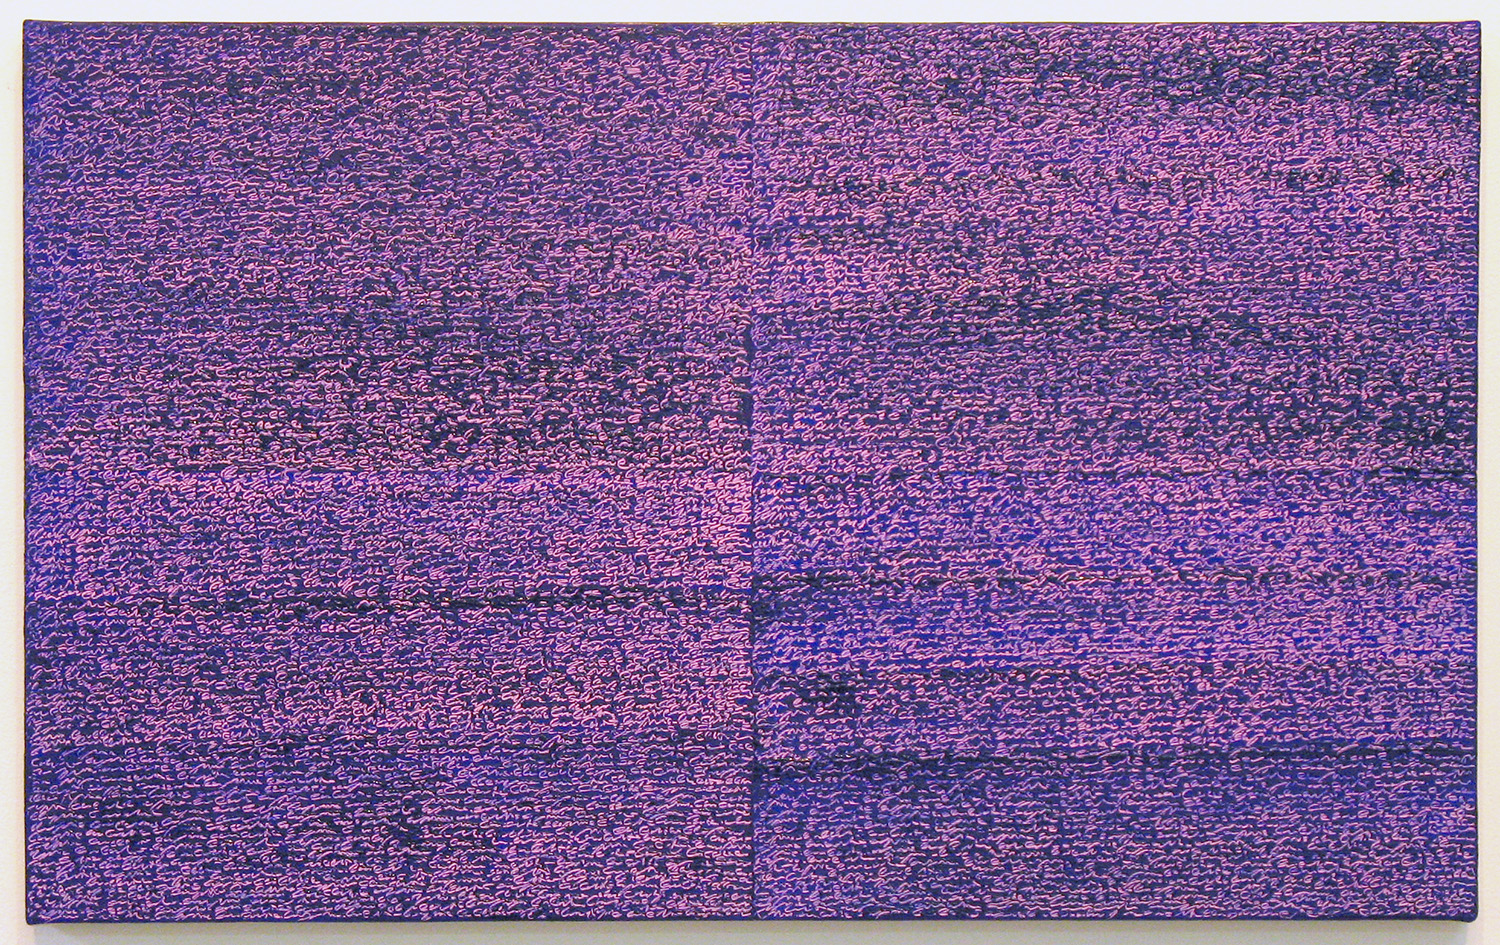 Open Book -pink-violet-<br>oil and amber on canvas over panel, 37 x 60 cm, 2008